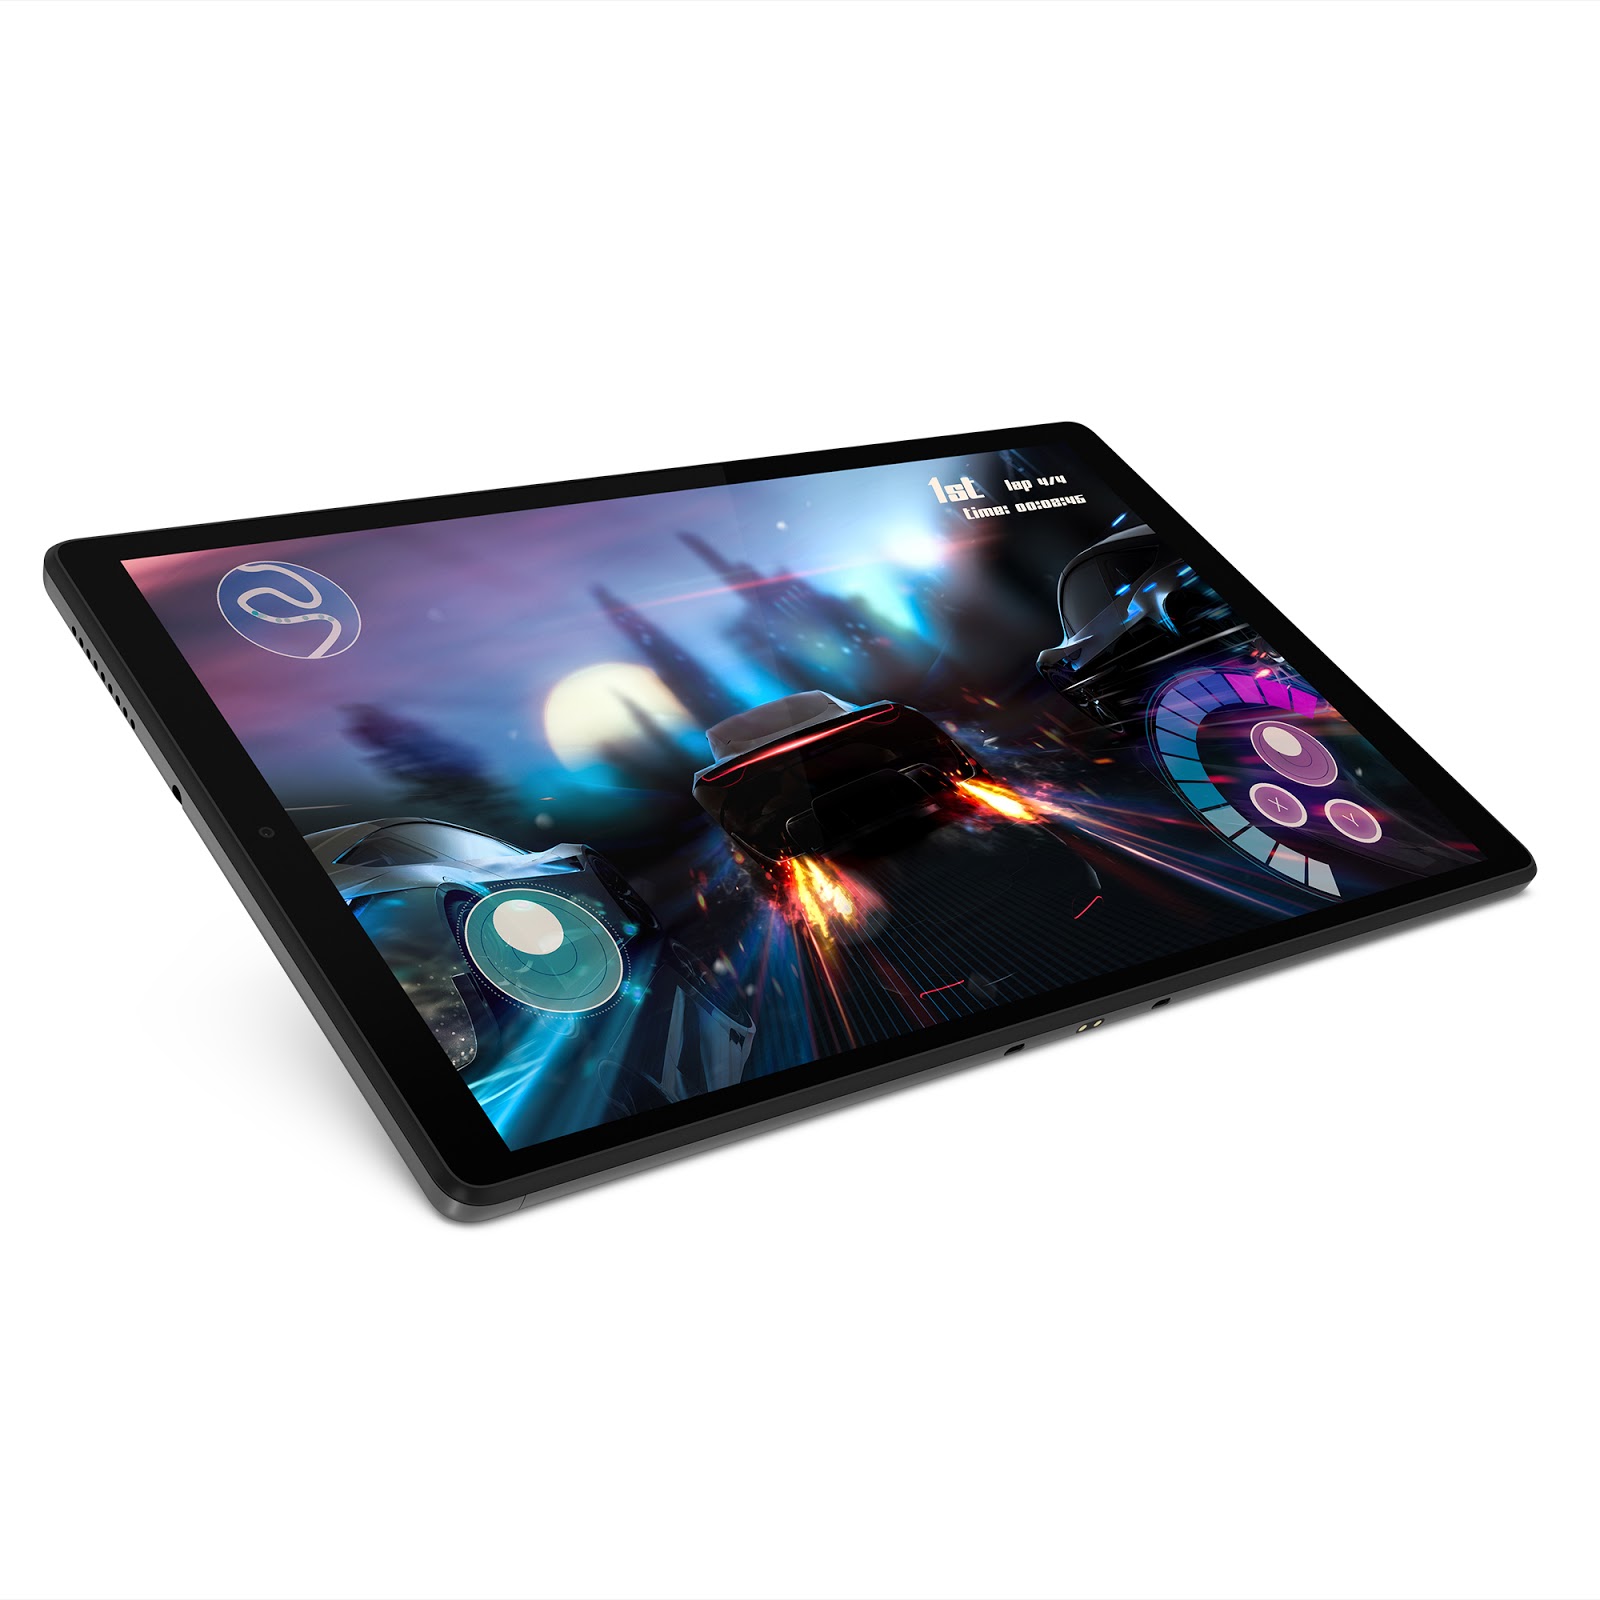 Lenovo Smart Tab M10 HD 10.1" Tablet with Google Assistant, 32GB Storage, 2GB Memory, 2.3GHz Octa-Core Processor, Android 10, HD Display - image 4 of 12